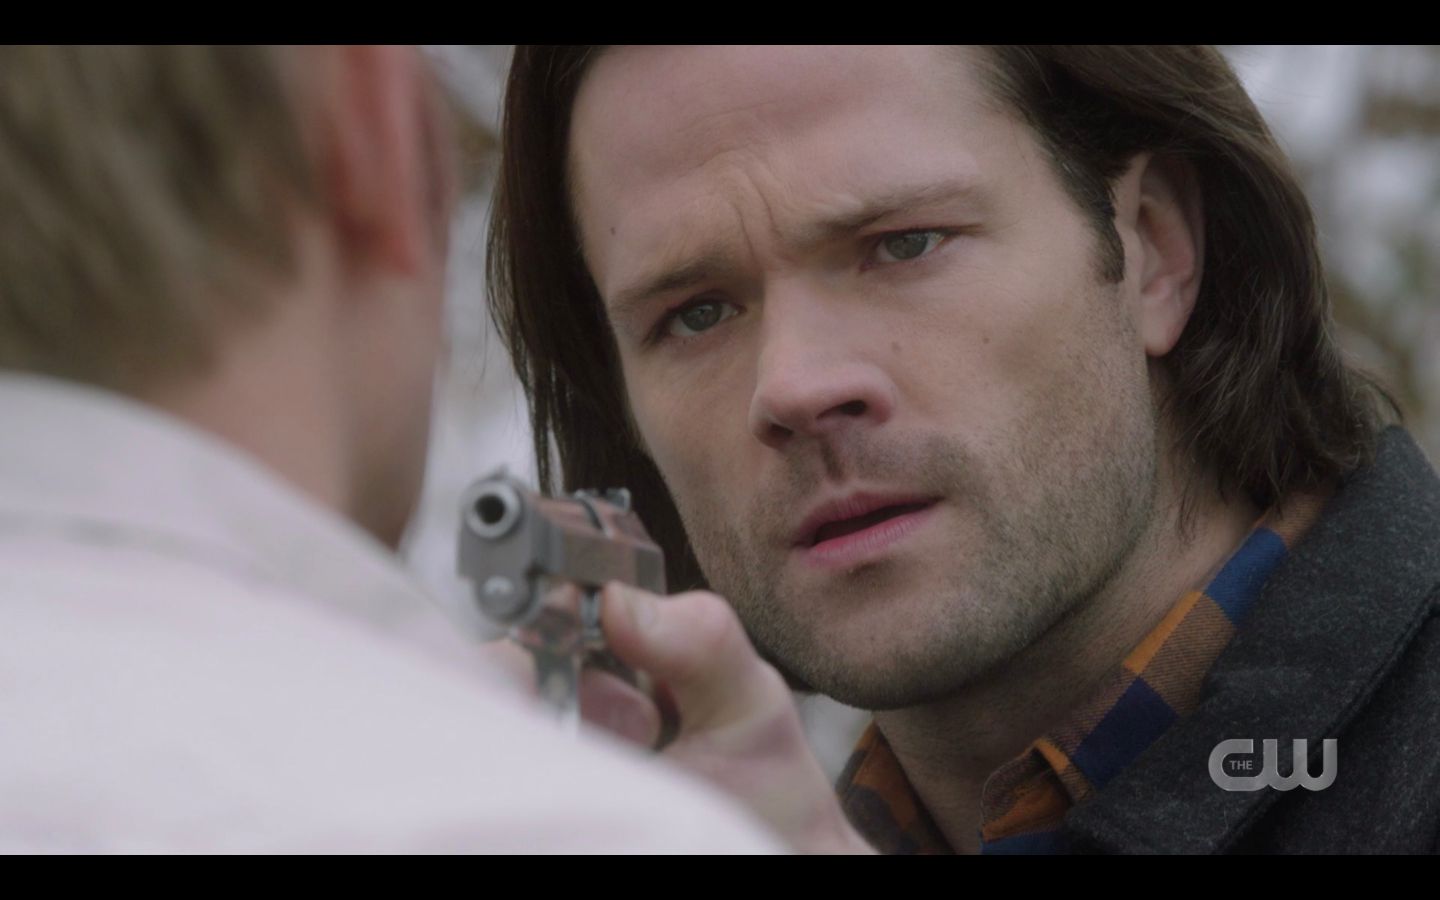 Sam Winchester holding pistol to Nicks face angry 14.17